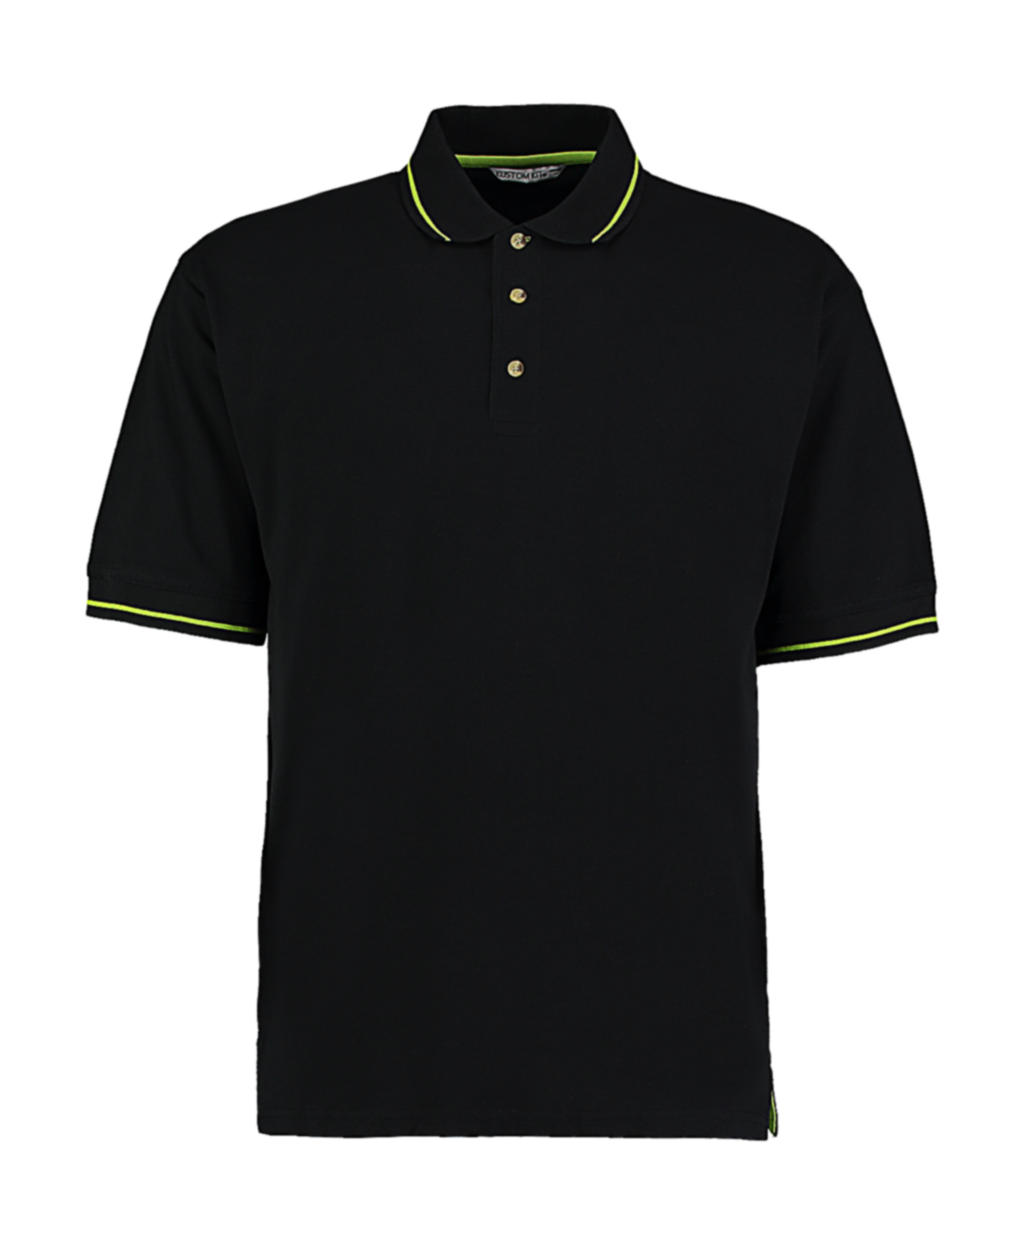  Mens Classic Fit St. Mellion Polo in Farbe Black/Lime